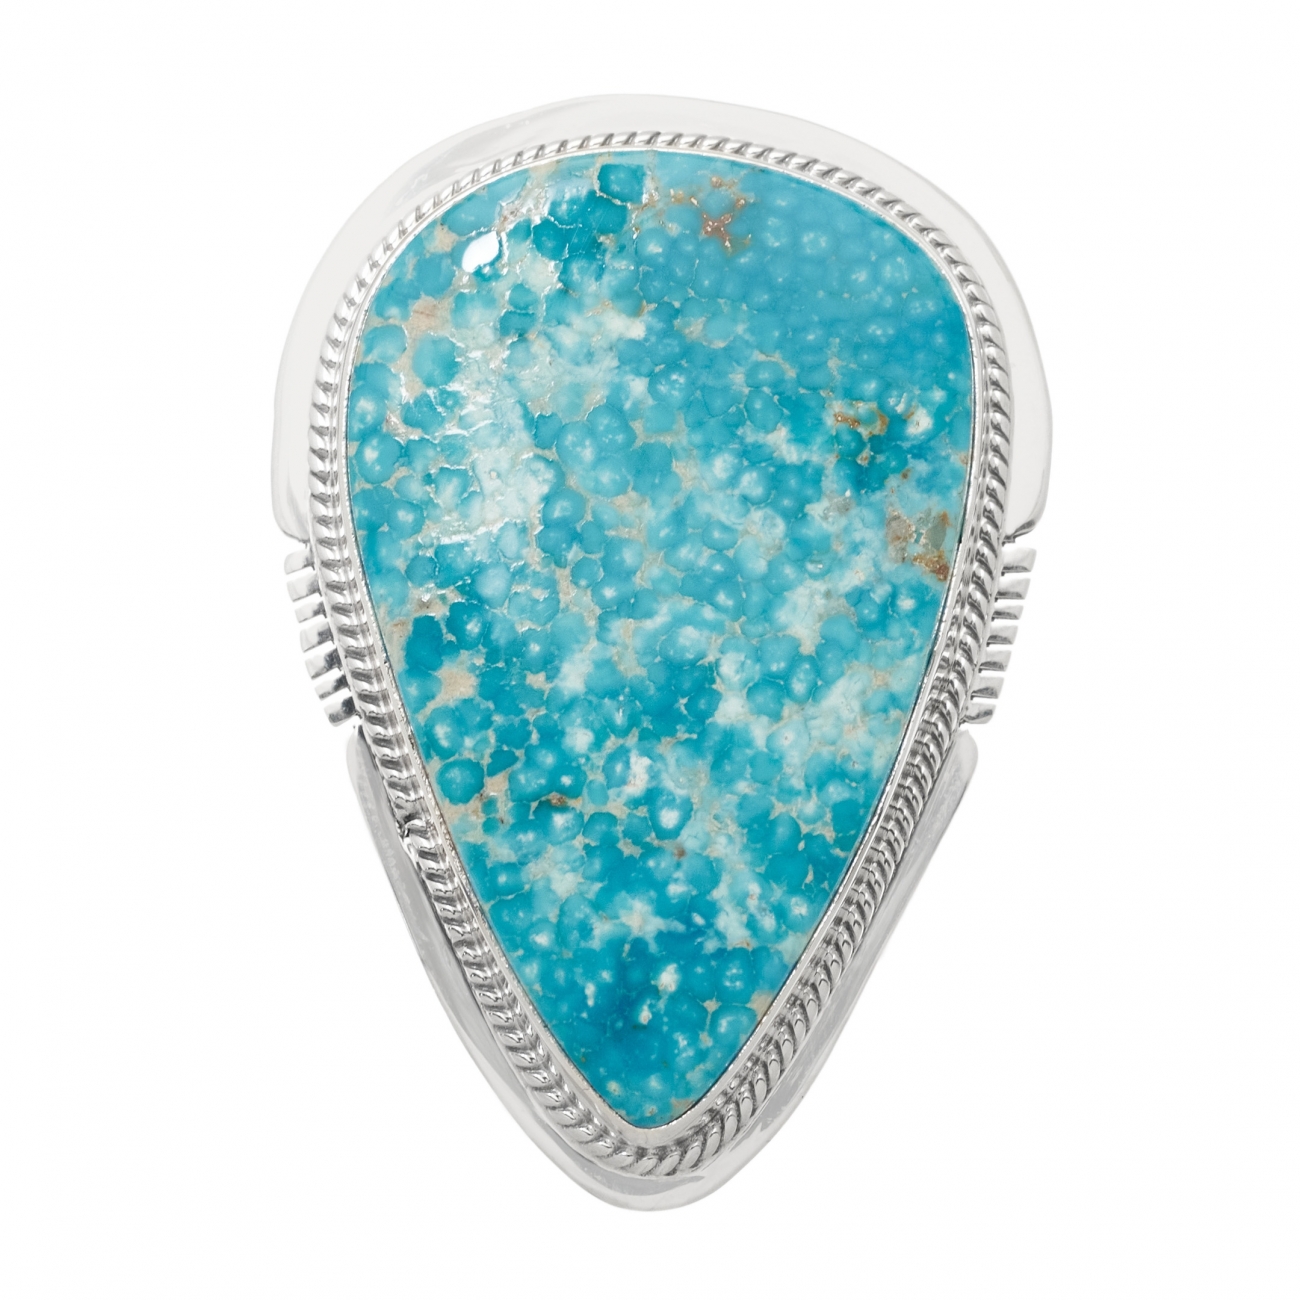 Navajo ring for women BA1056 in turquoise and silver - Harpo Paris